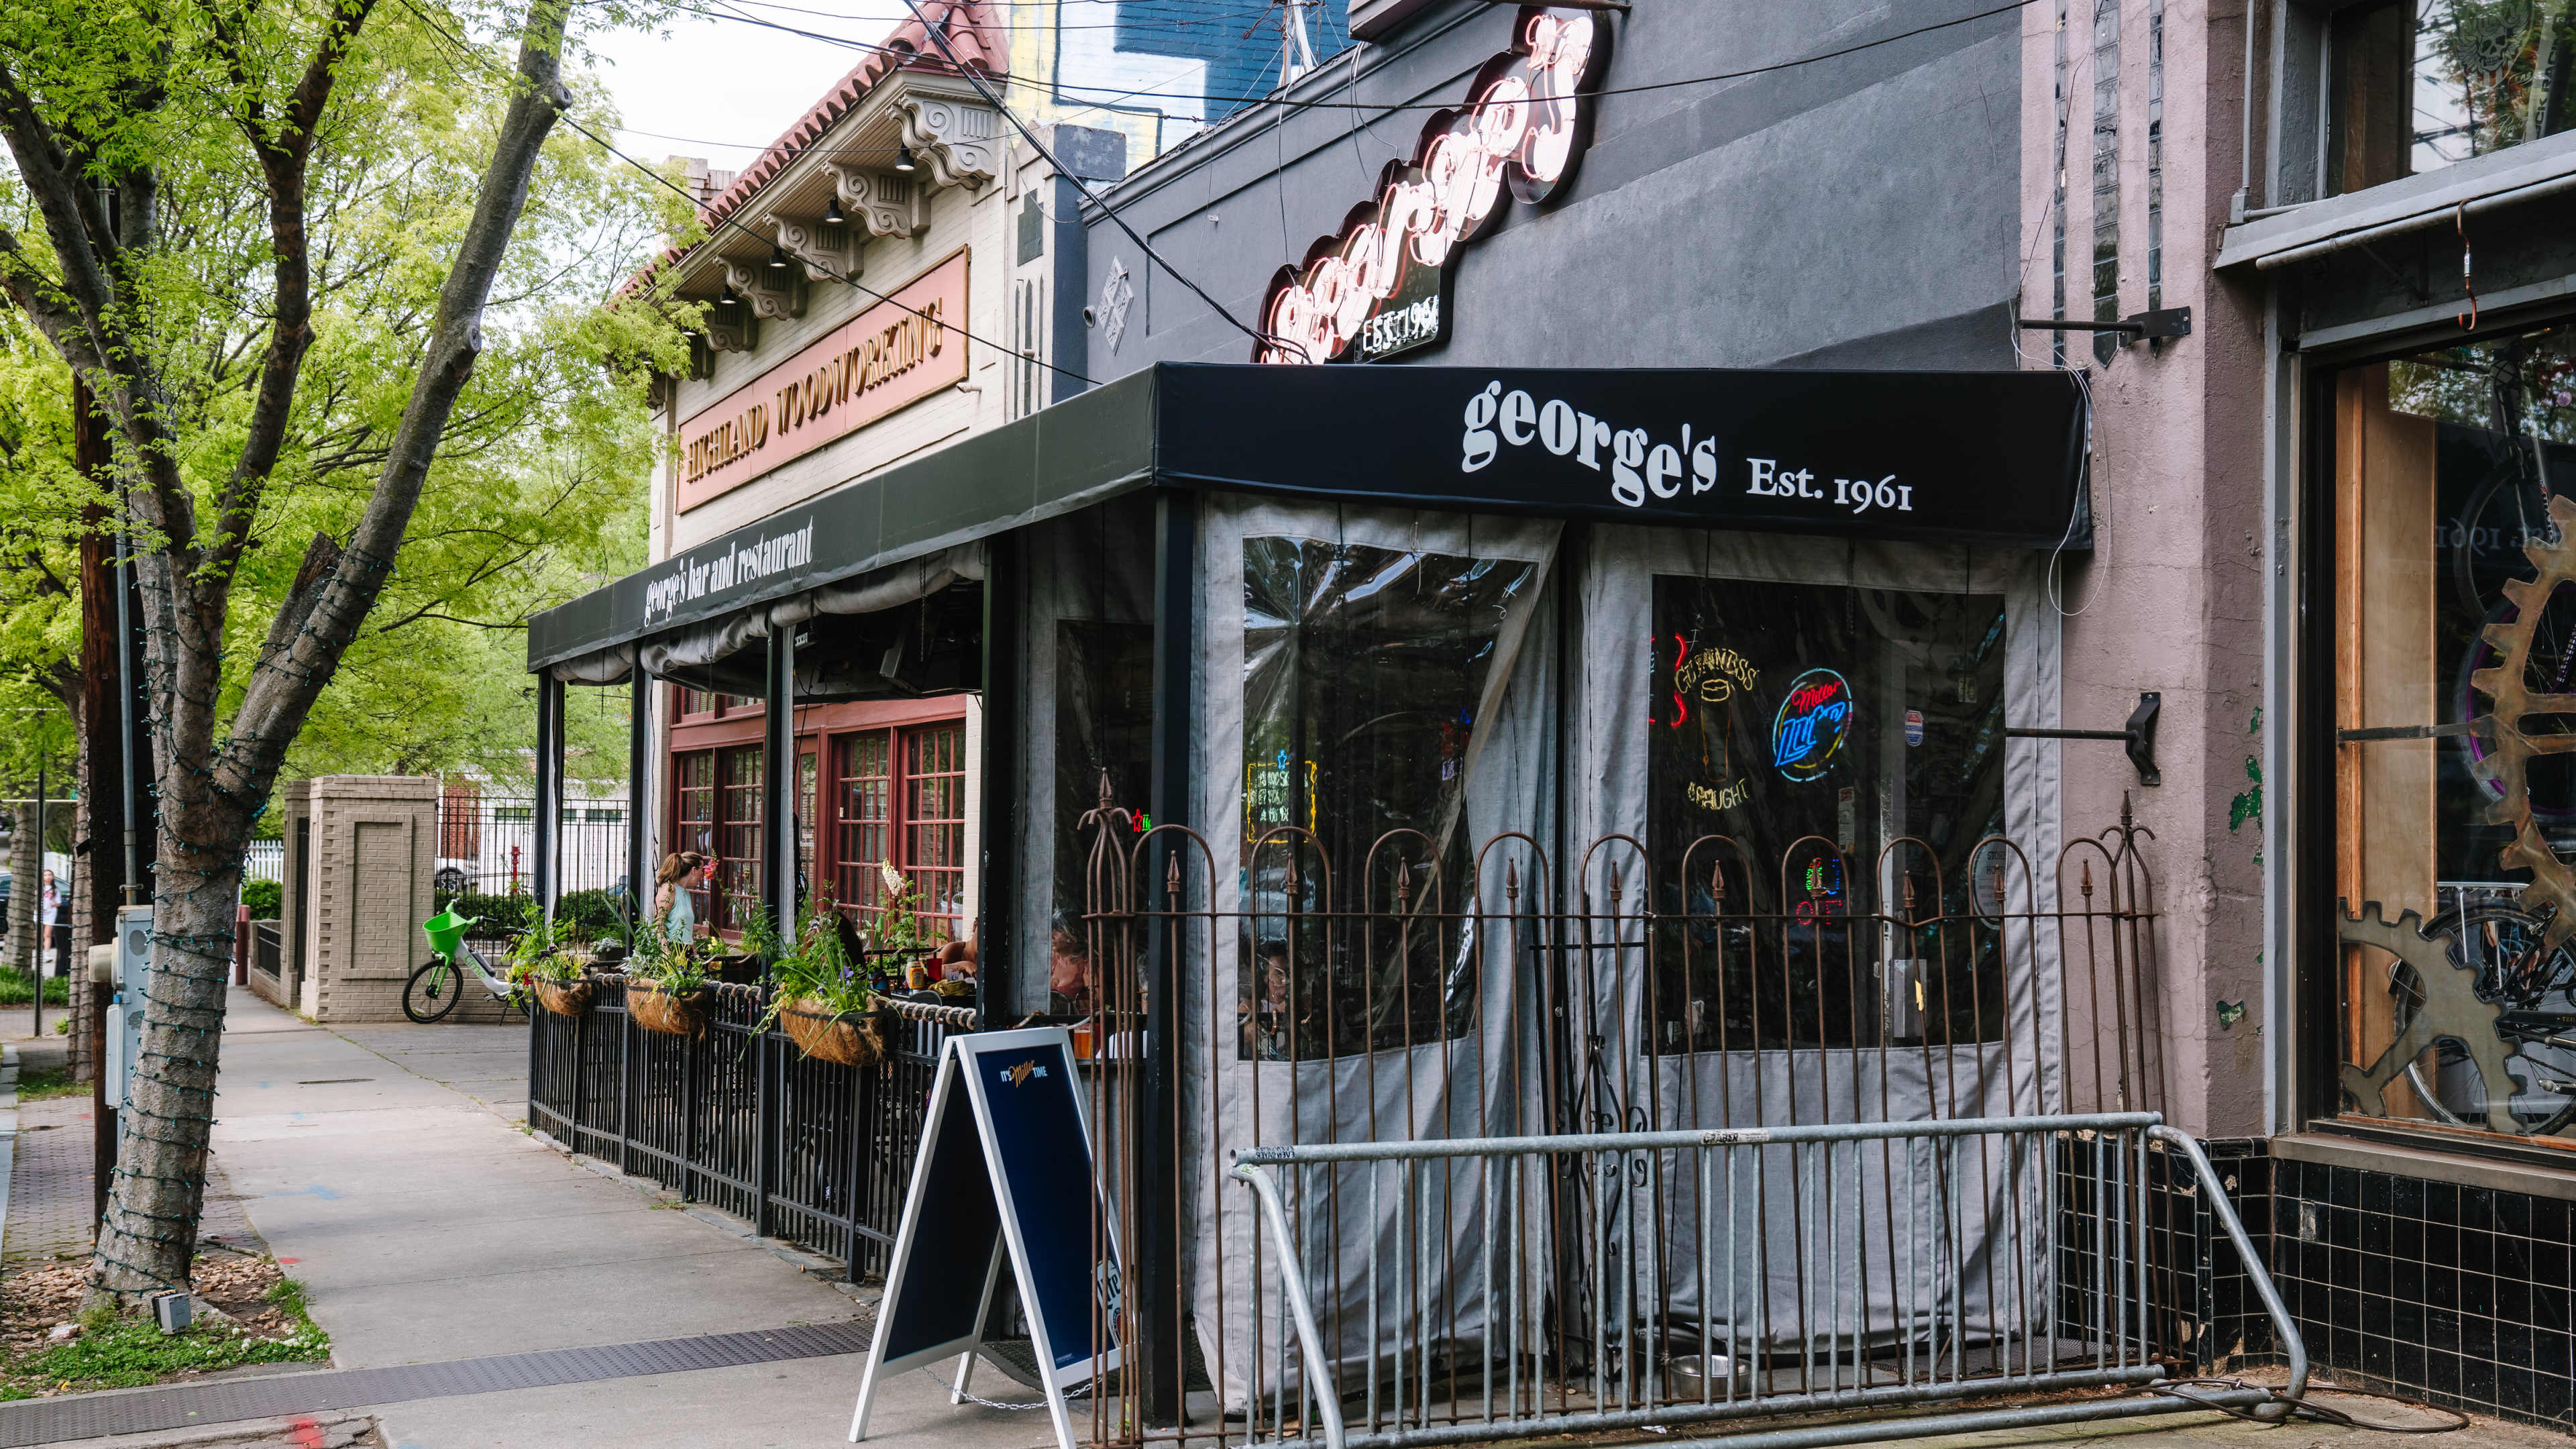 The exterior of George's.